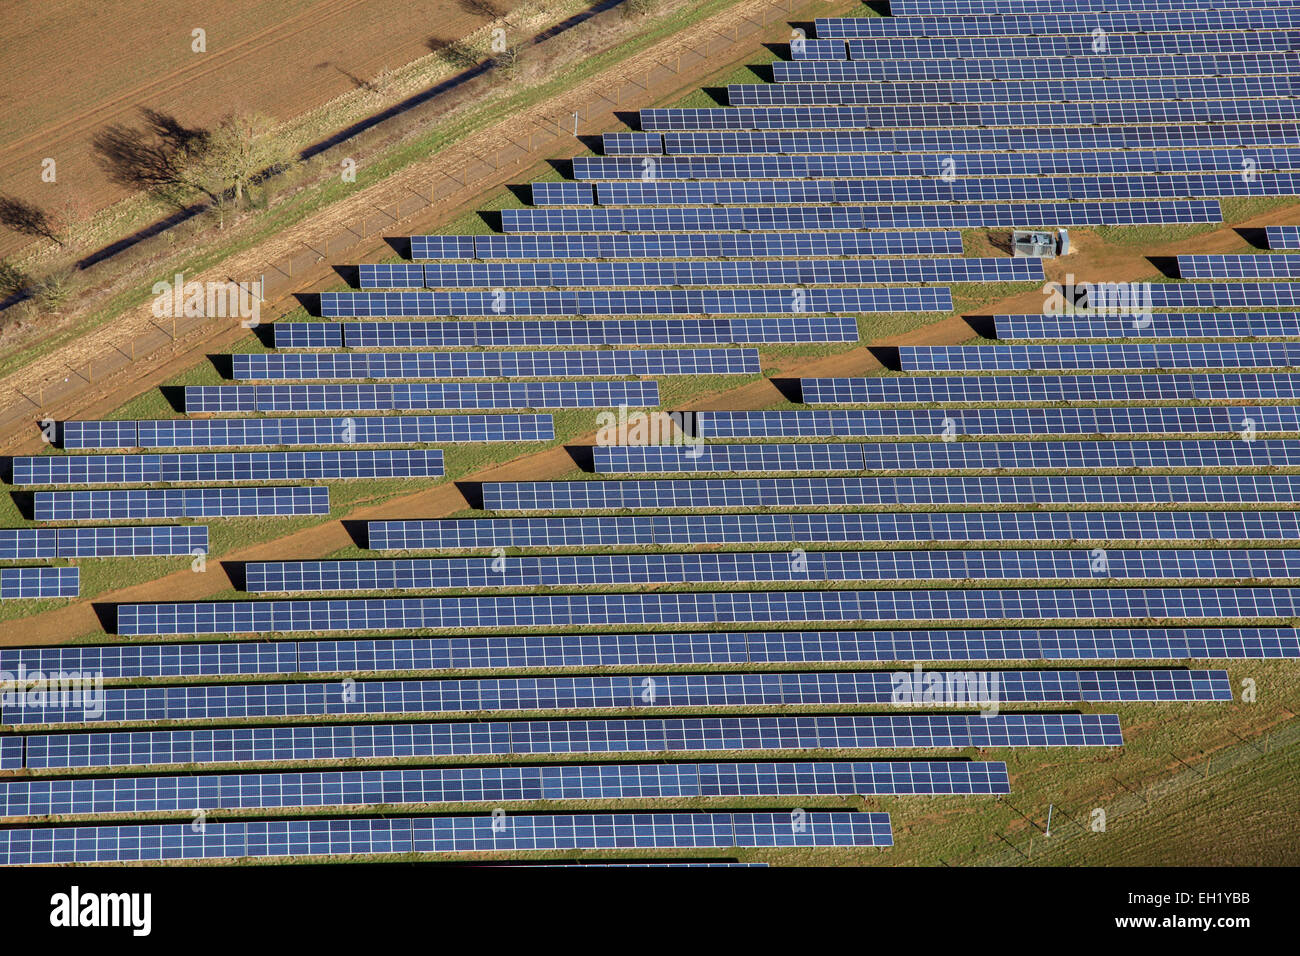 a close-up aerial view of solar panels (pv cells) on a solar farm in the UK Stock Photo